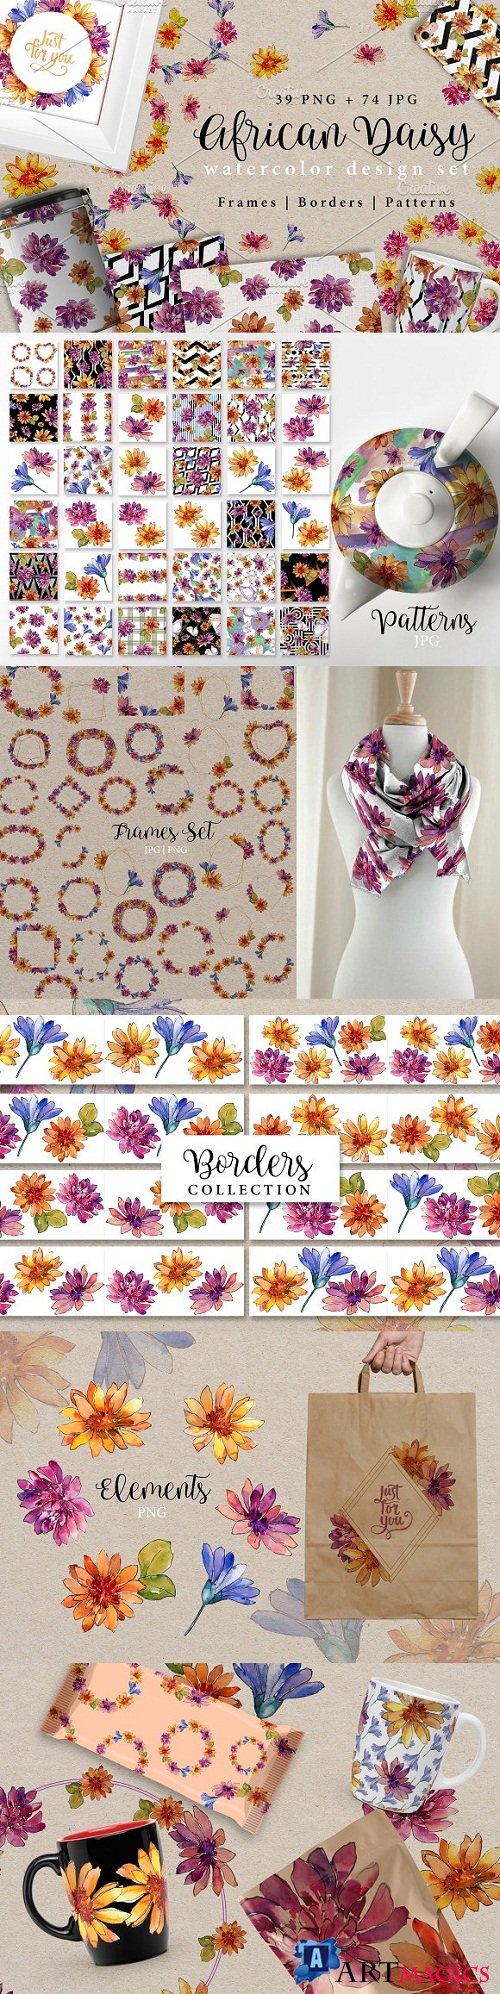 African daisy PNG watercolor set - 2962398